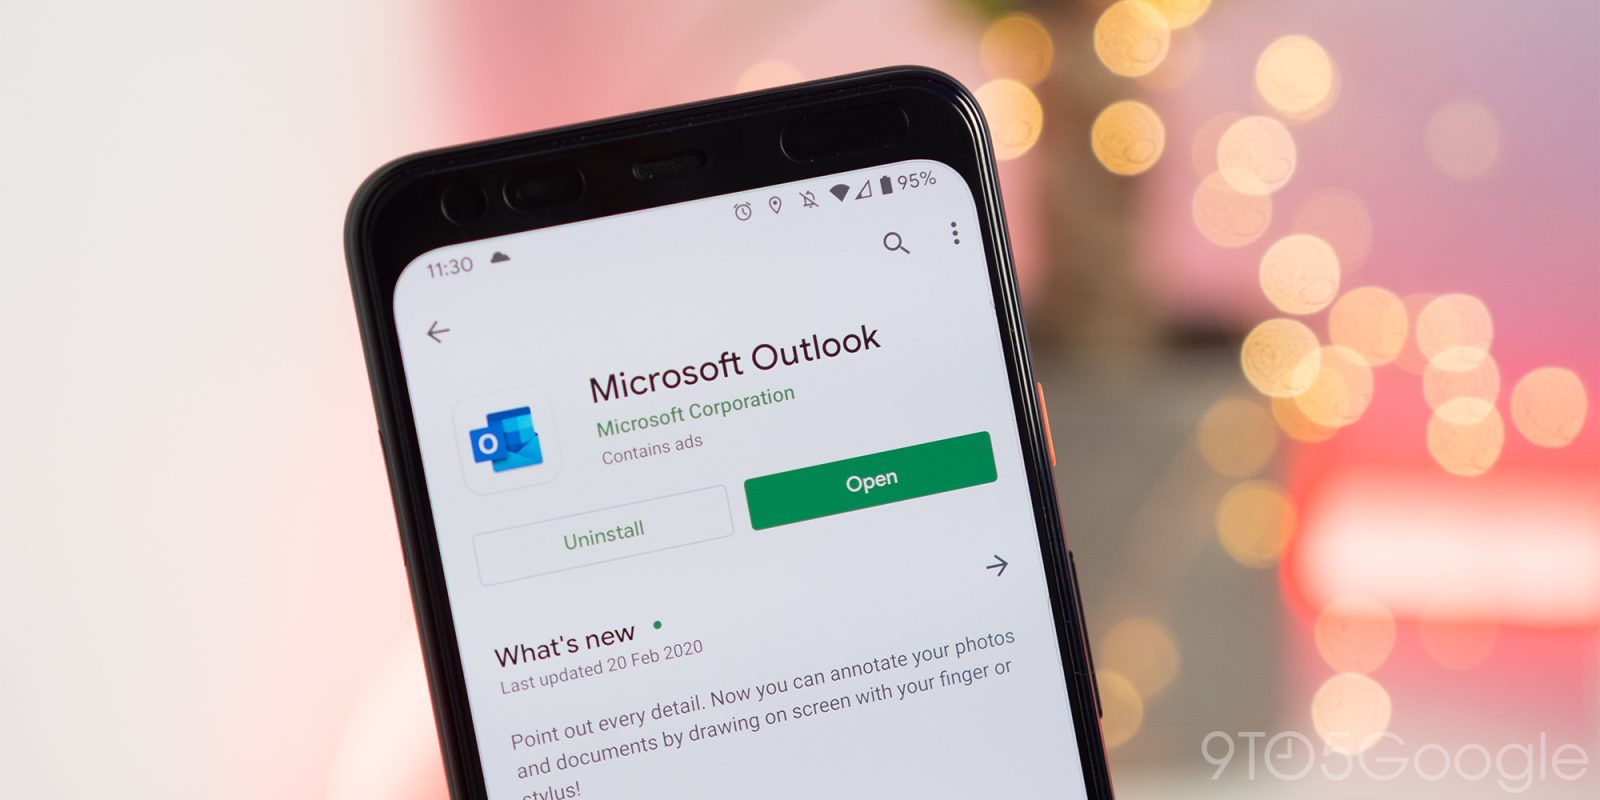 Outlook for Android adds sync support for Google, Samsung calendars